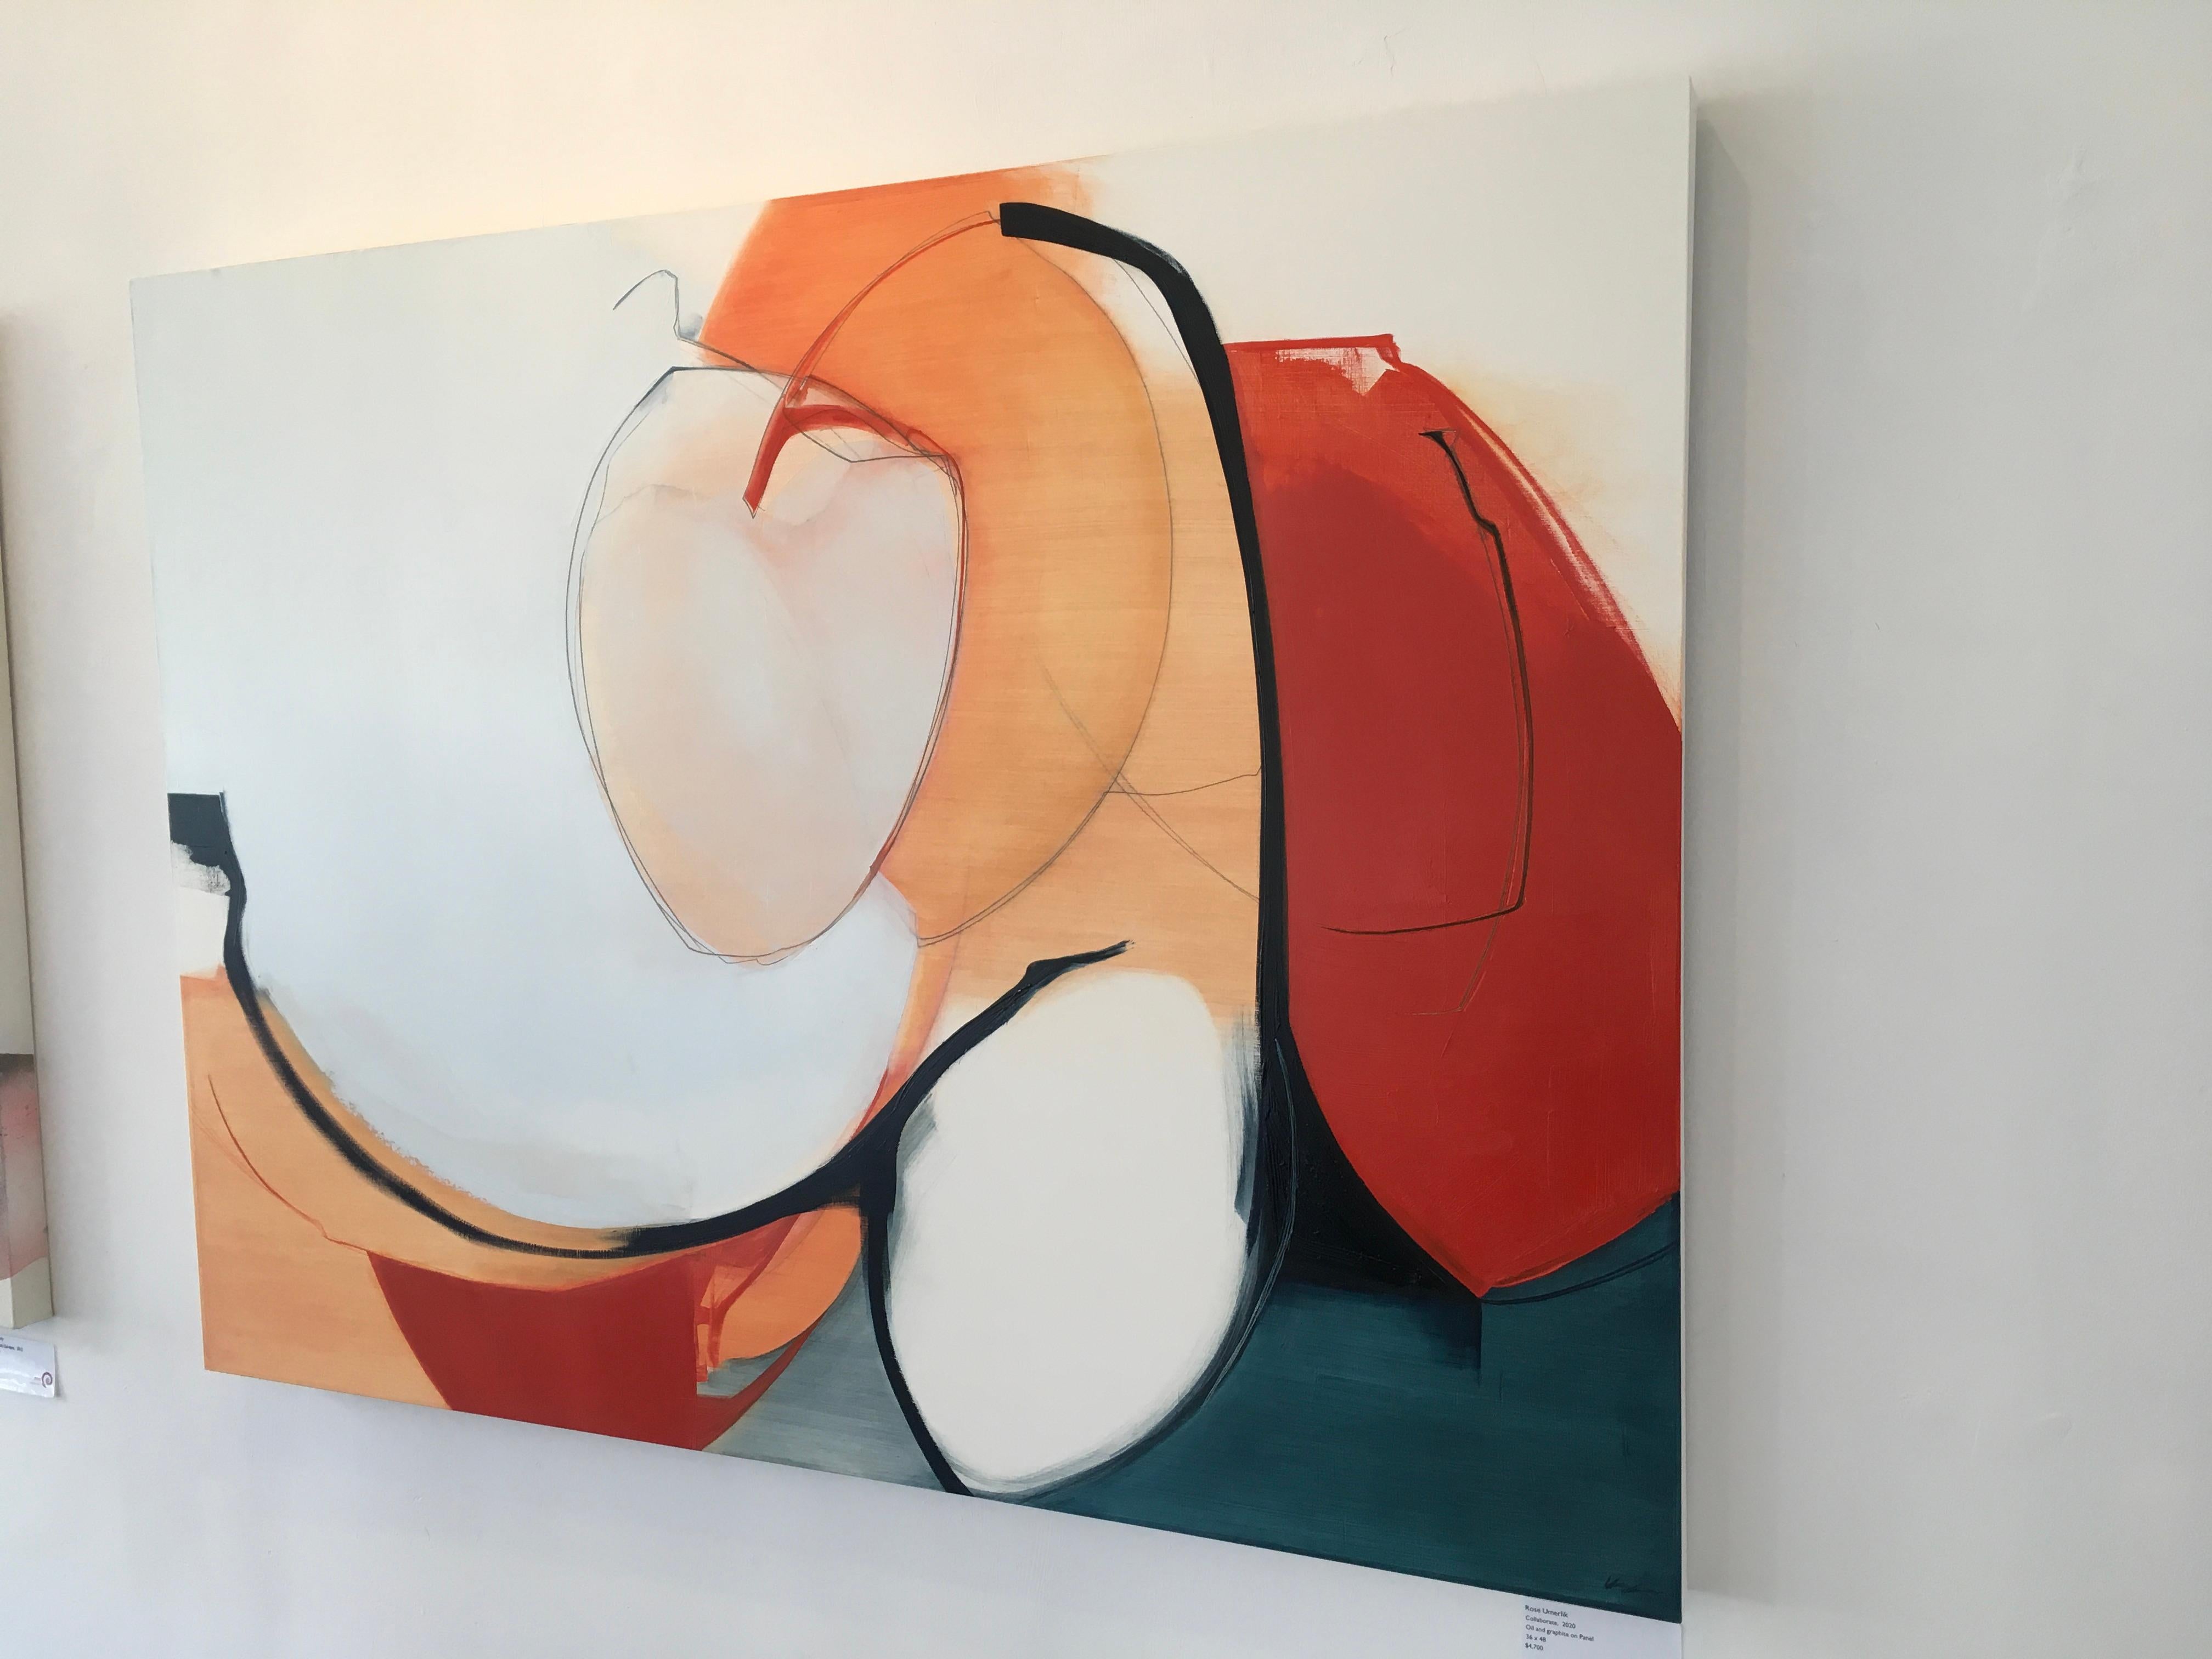 Collaborate by Rose Umerlik is an abstract painting, Oil and Graphite on wood panel, 36 x 48.

Rose Umerlik extracts the intangible emotional moments that live in our collective human psyche and interprets them abstractly through form, line and